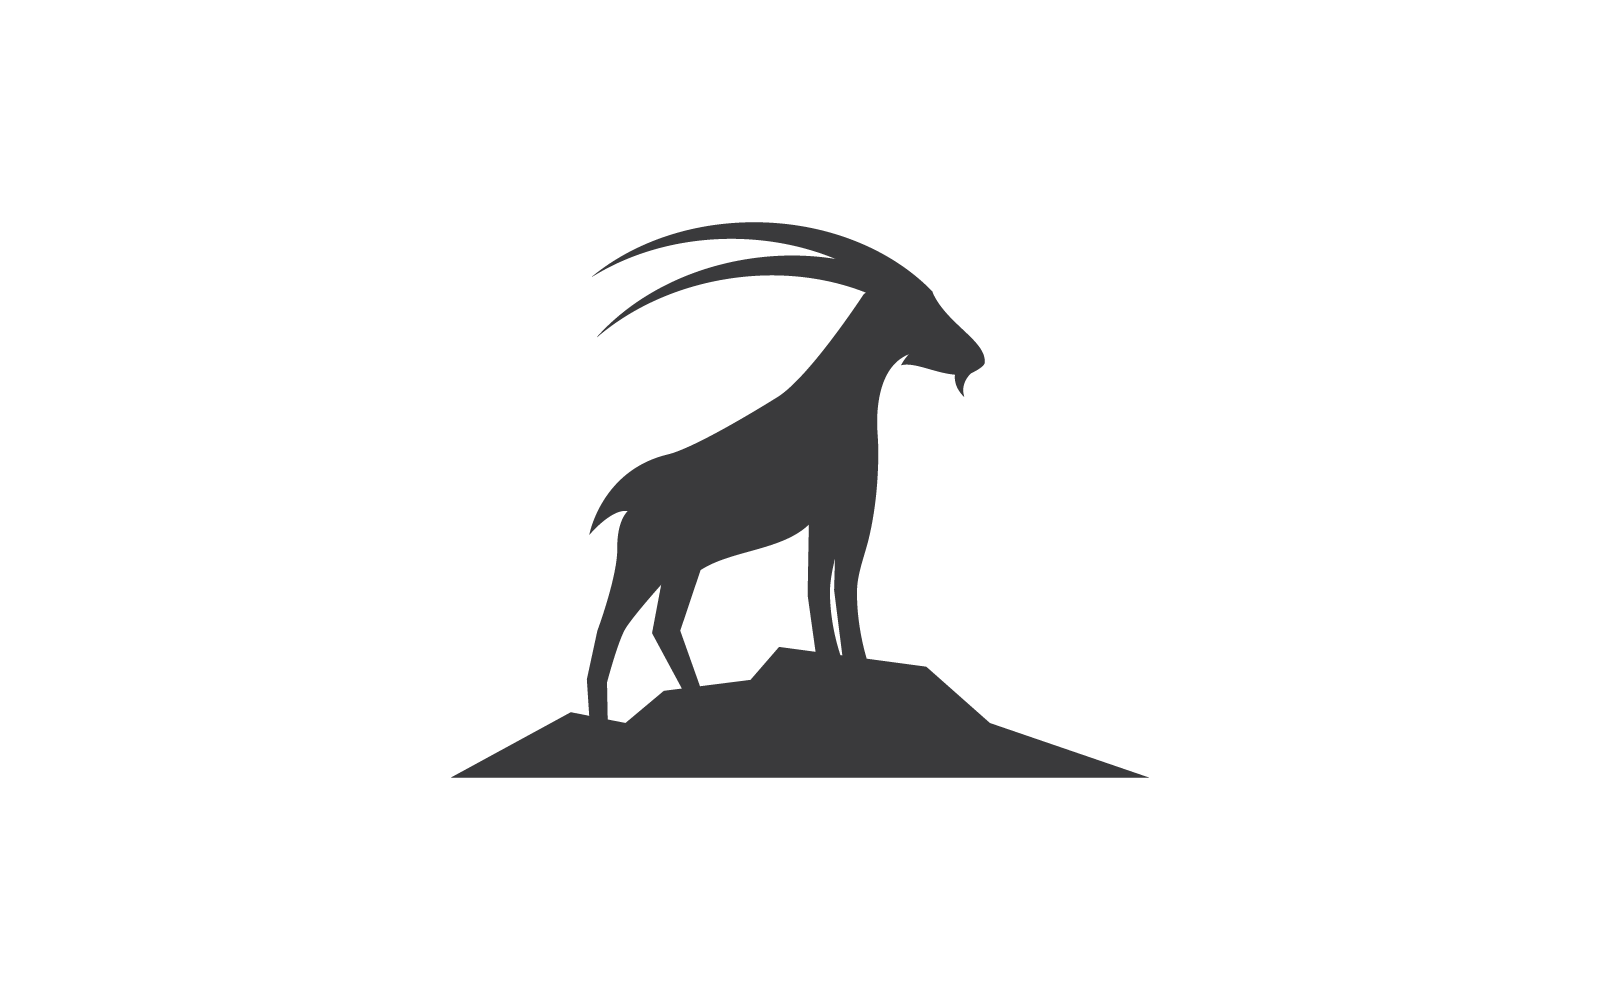 Goat and sheep illustration logo vector template